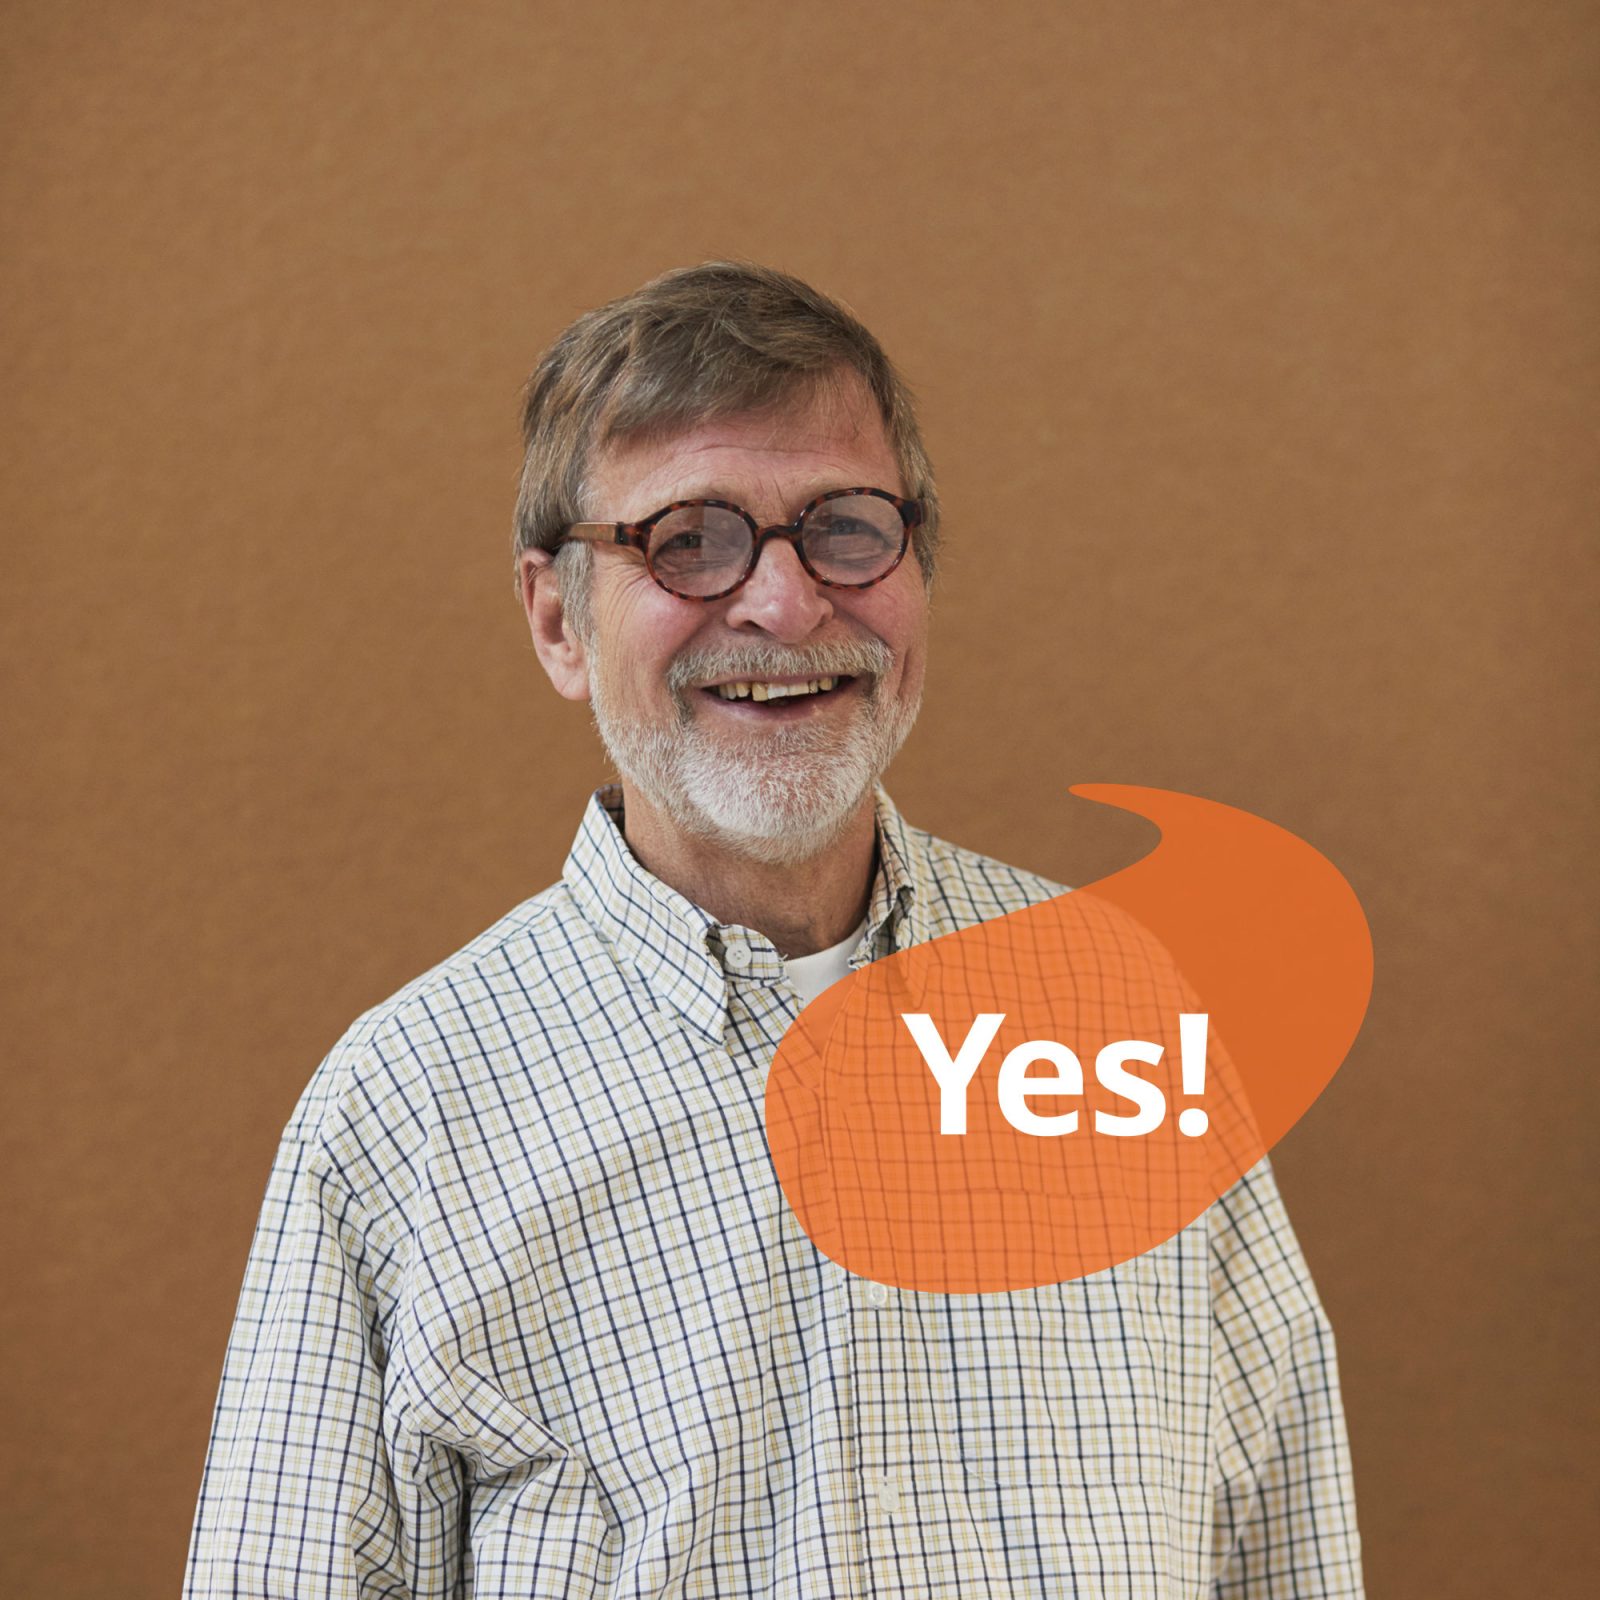 Grey-haired man in glasses and check shirt smiles. A speech bubble contains the text 'Yes'.